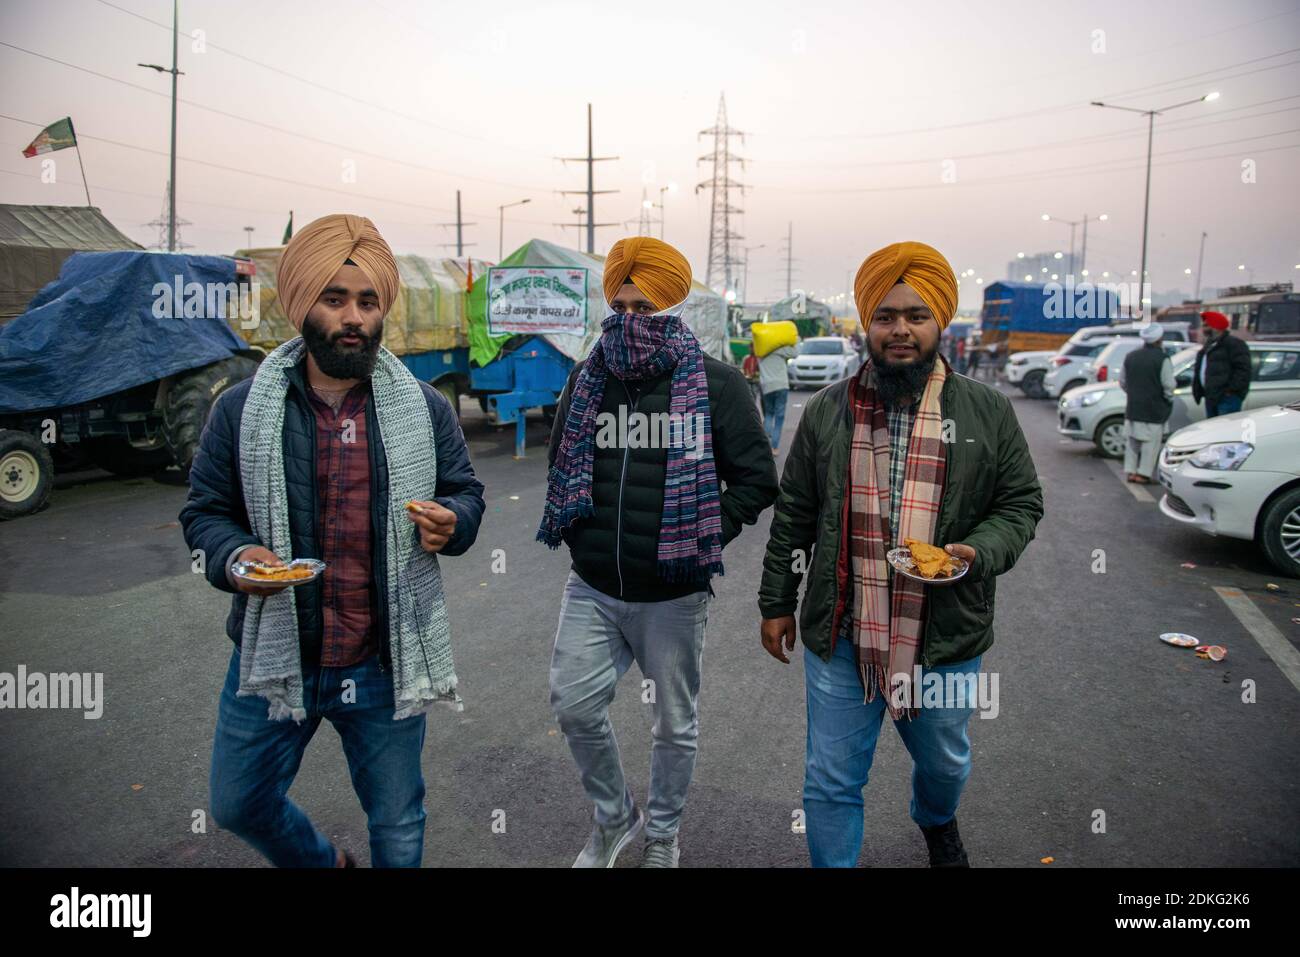 Sikh protesters wearing jackets and woollen stoles to wave off the cold weather during the demonstration.Farmers continue to protest at Delhi-Meerut Expressway and threaten to completely block another highway that connects to Delhi. Farmers want the three legislations to be scrapped while the government asserts that it is willing to continue talks but won't take back the laws. Stock Photo